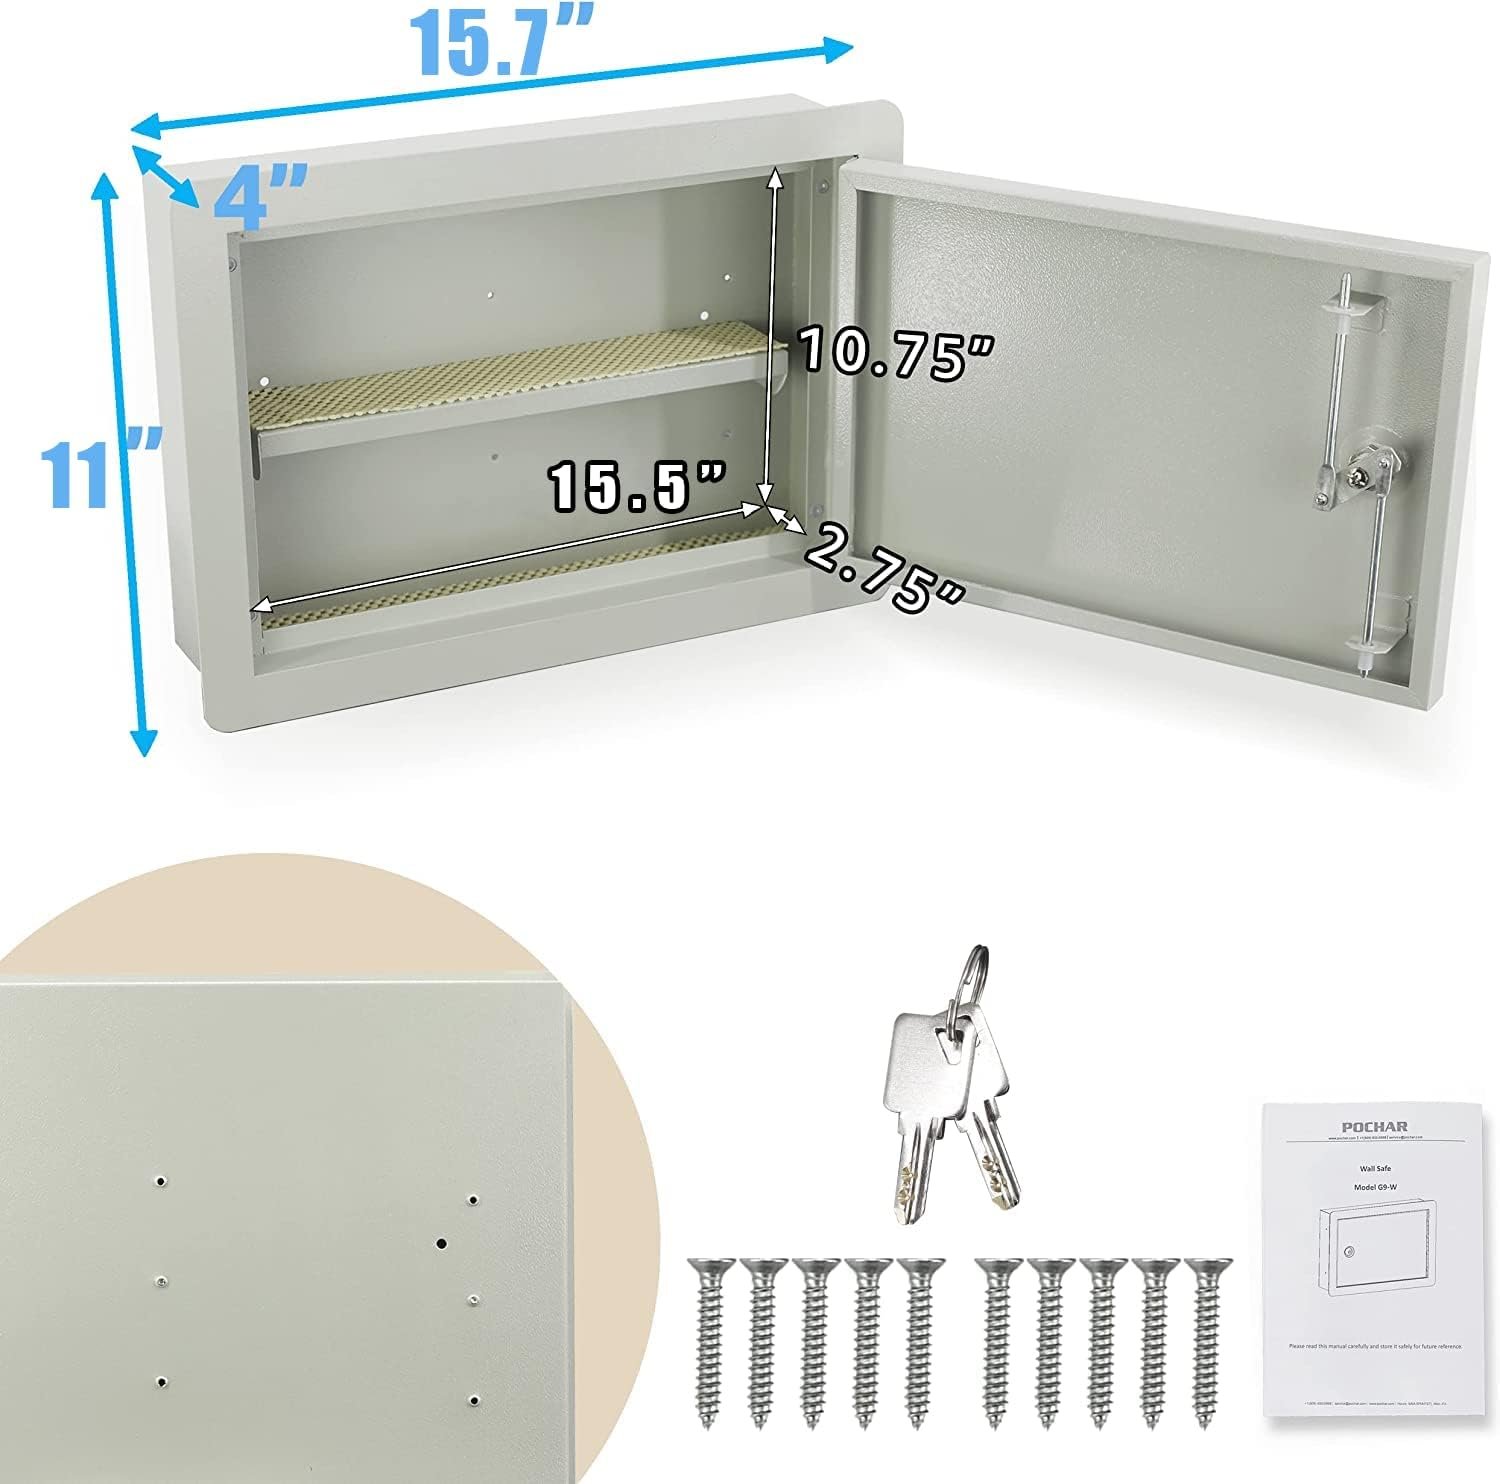 In Wall Safe with Key Lock Review